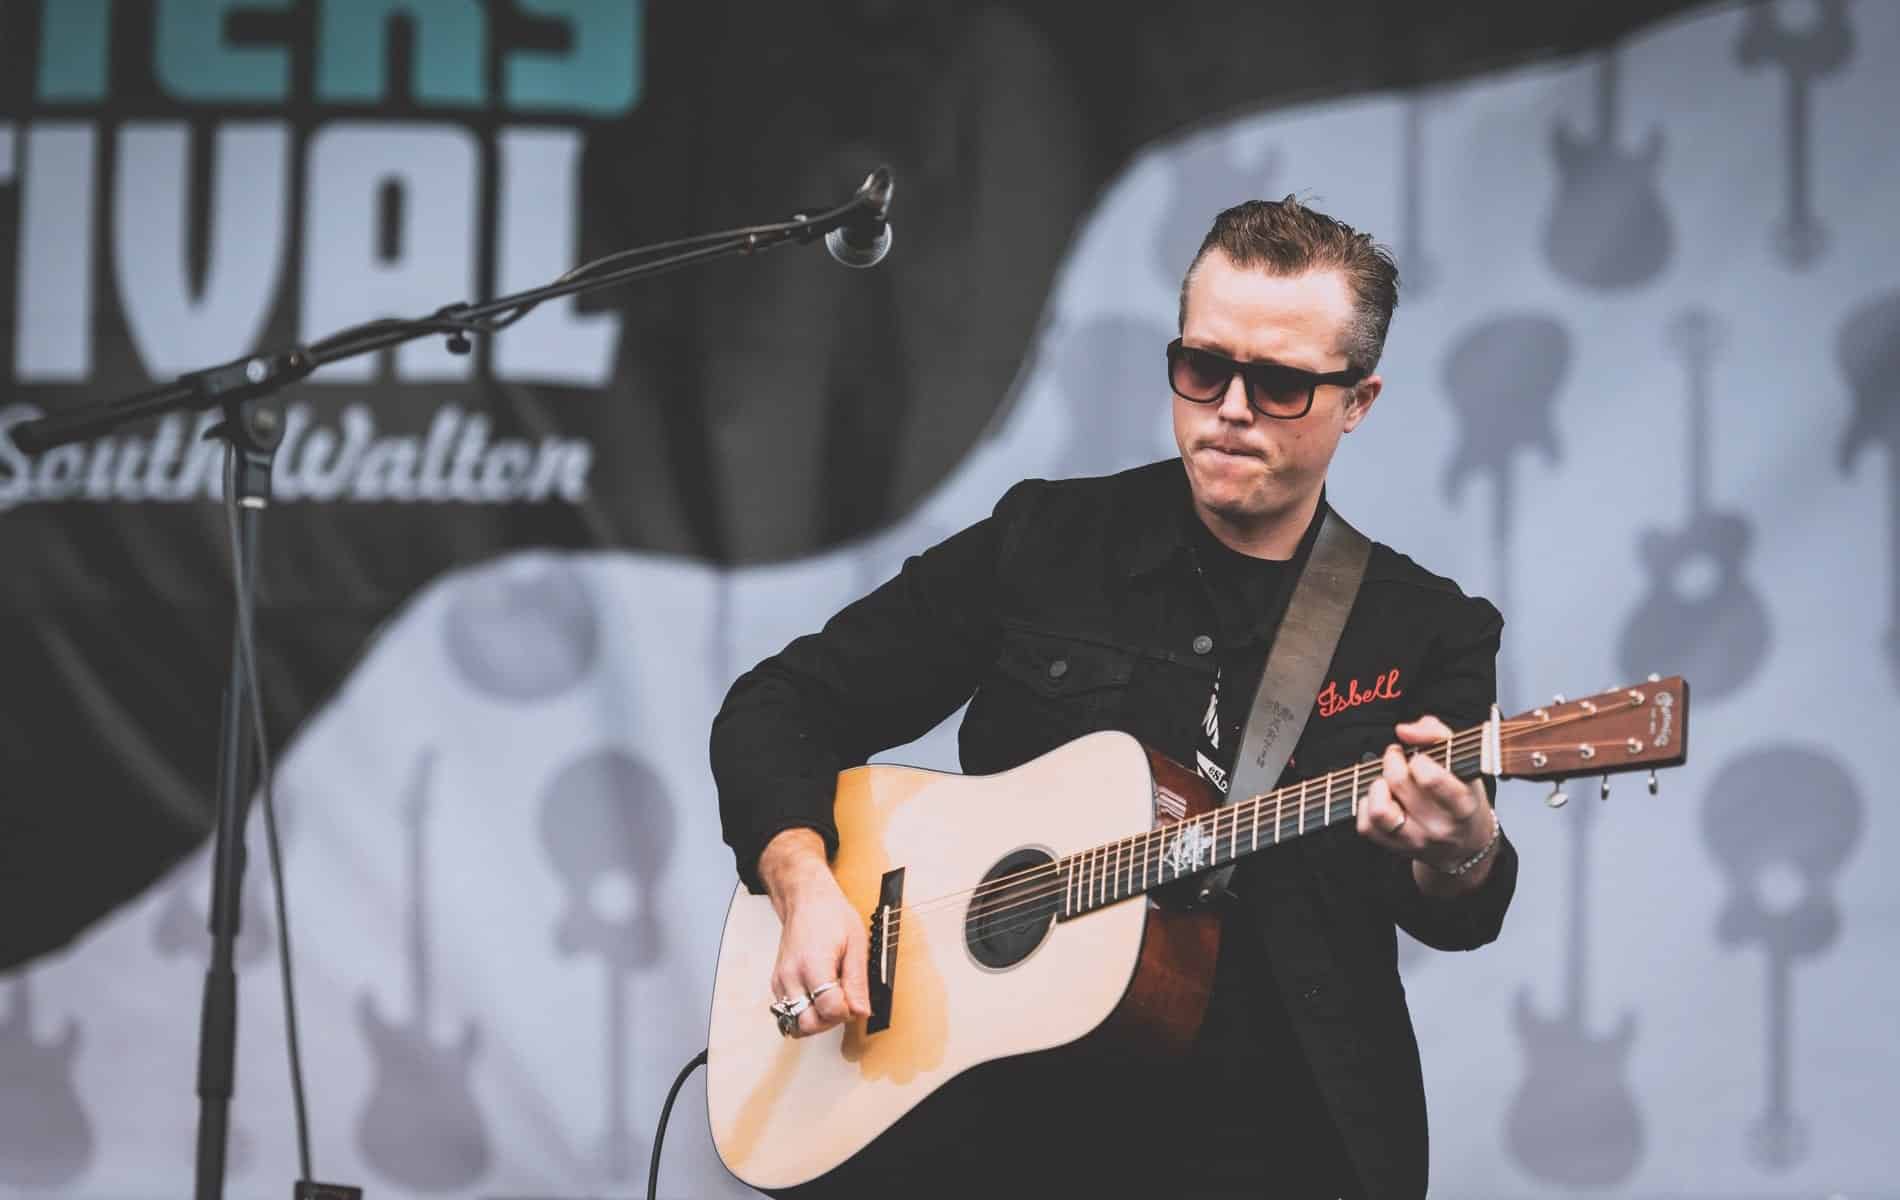 Jason Isbell returned to 30A Fest to headline Saturday’s concerts at Grand Boulevard for the 30A Songwriters Festival